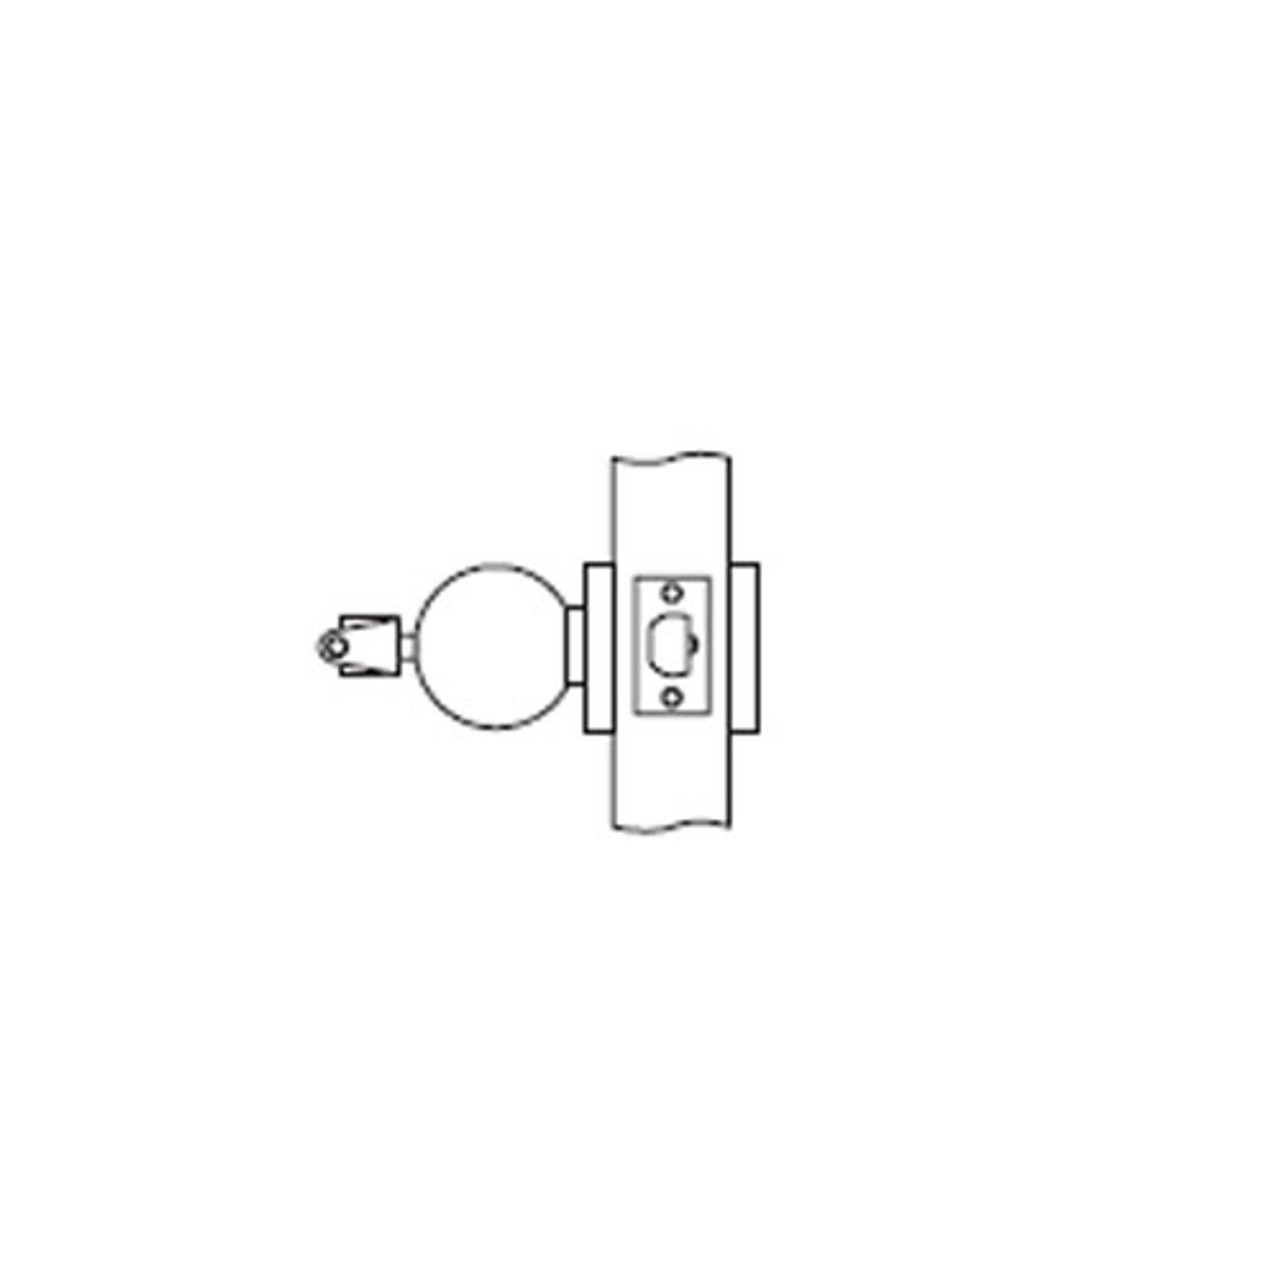 MK18-TA-10B Arrow Lock MK Series Cylindrical Locksets Single Cylinder for Communicating Classroom with TA Knob in Oil Rubbed Bronze